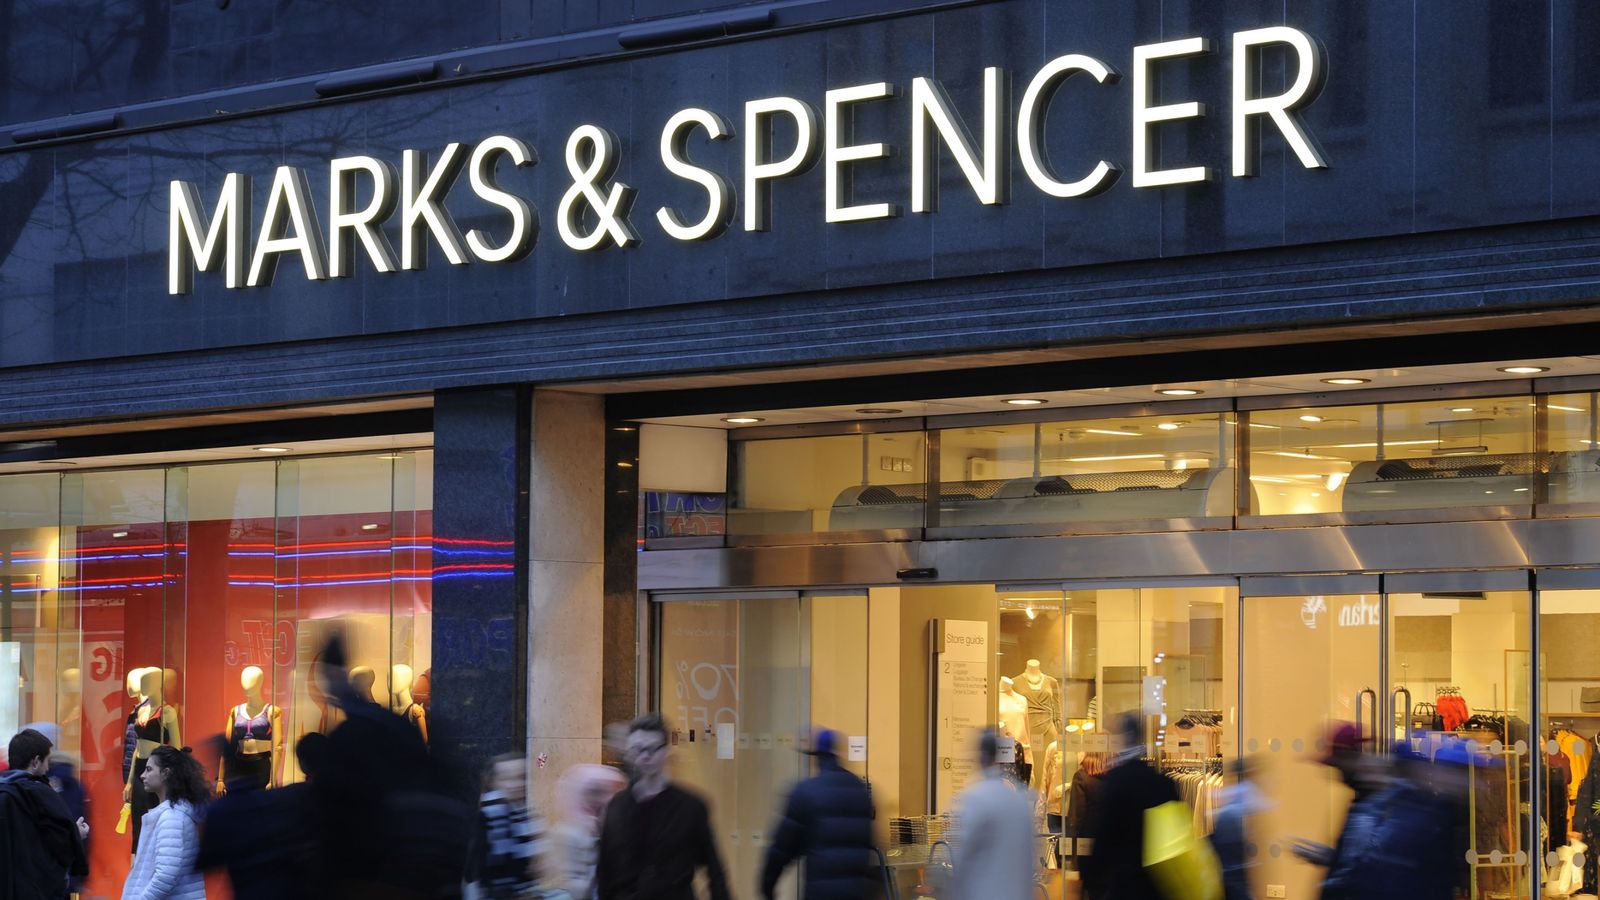 Middle class shoplifters partly to blame for rise in retail crime, says Marks & Spencer chairman